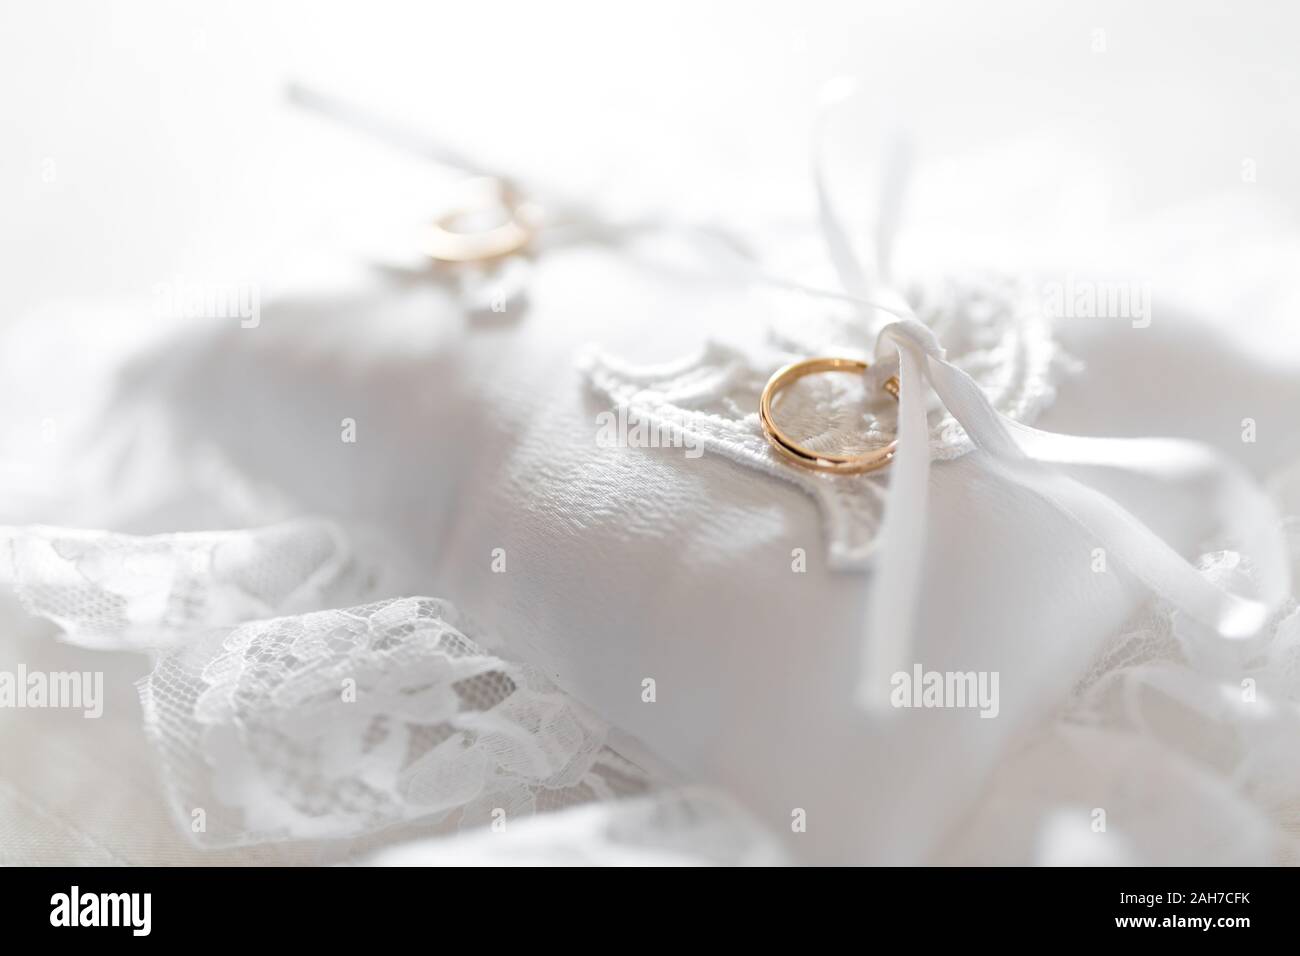 Close up of two golden wedding rings lying on a white cushion flooded in light Stock Photo